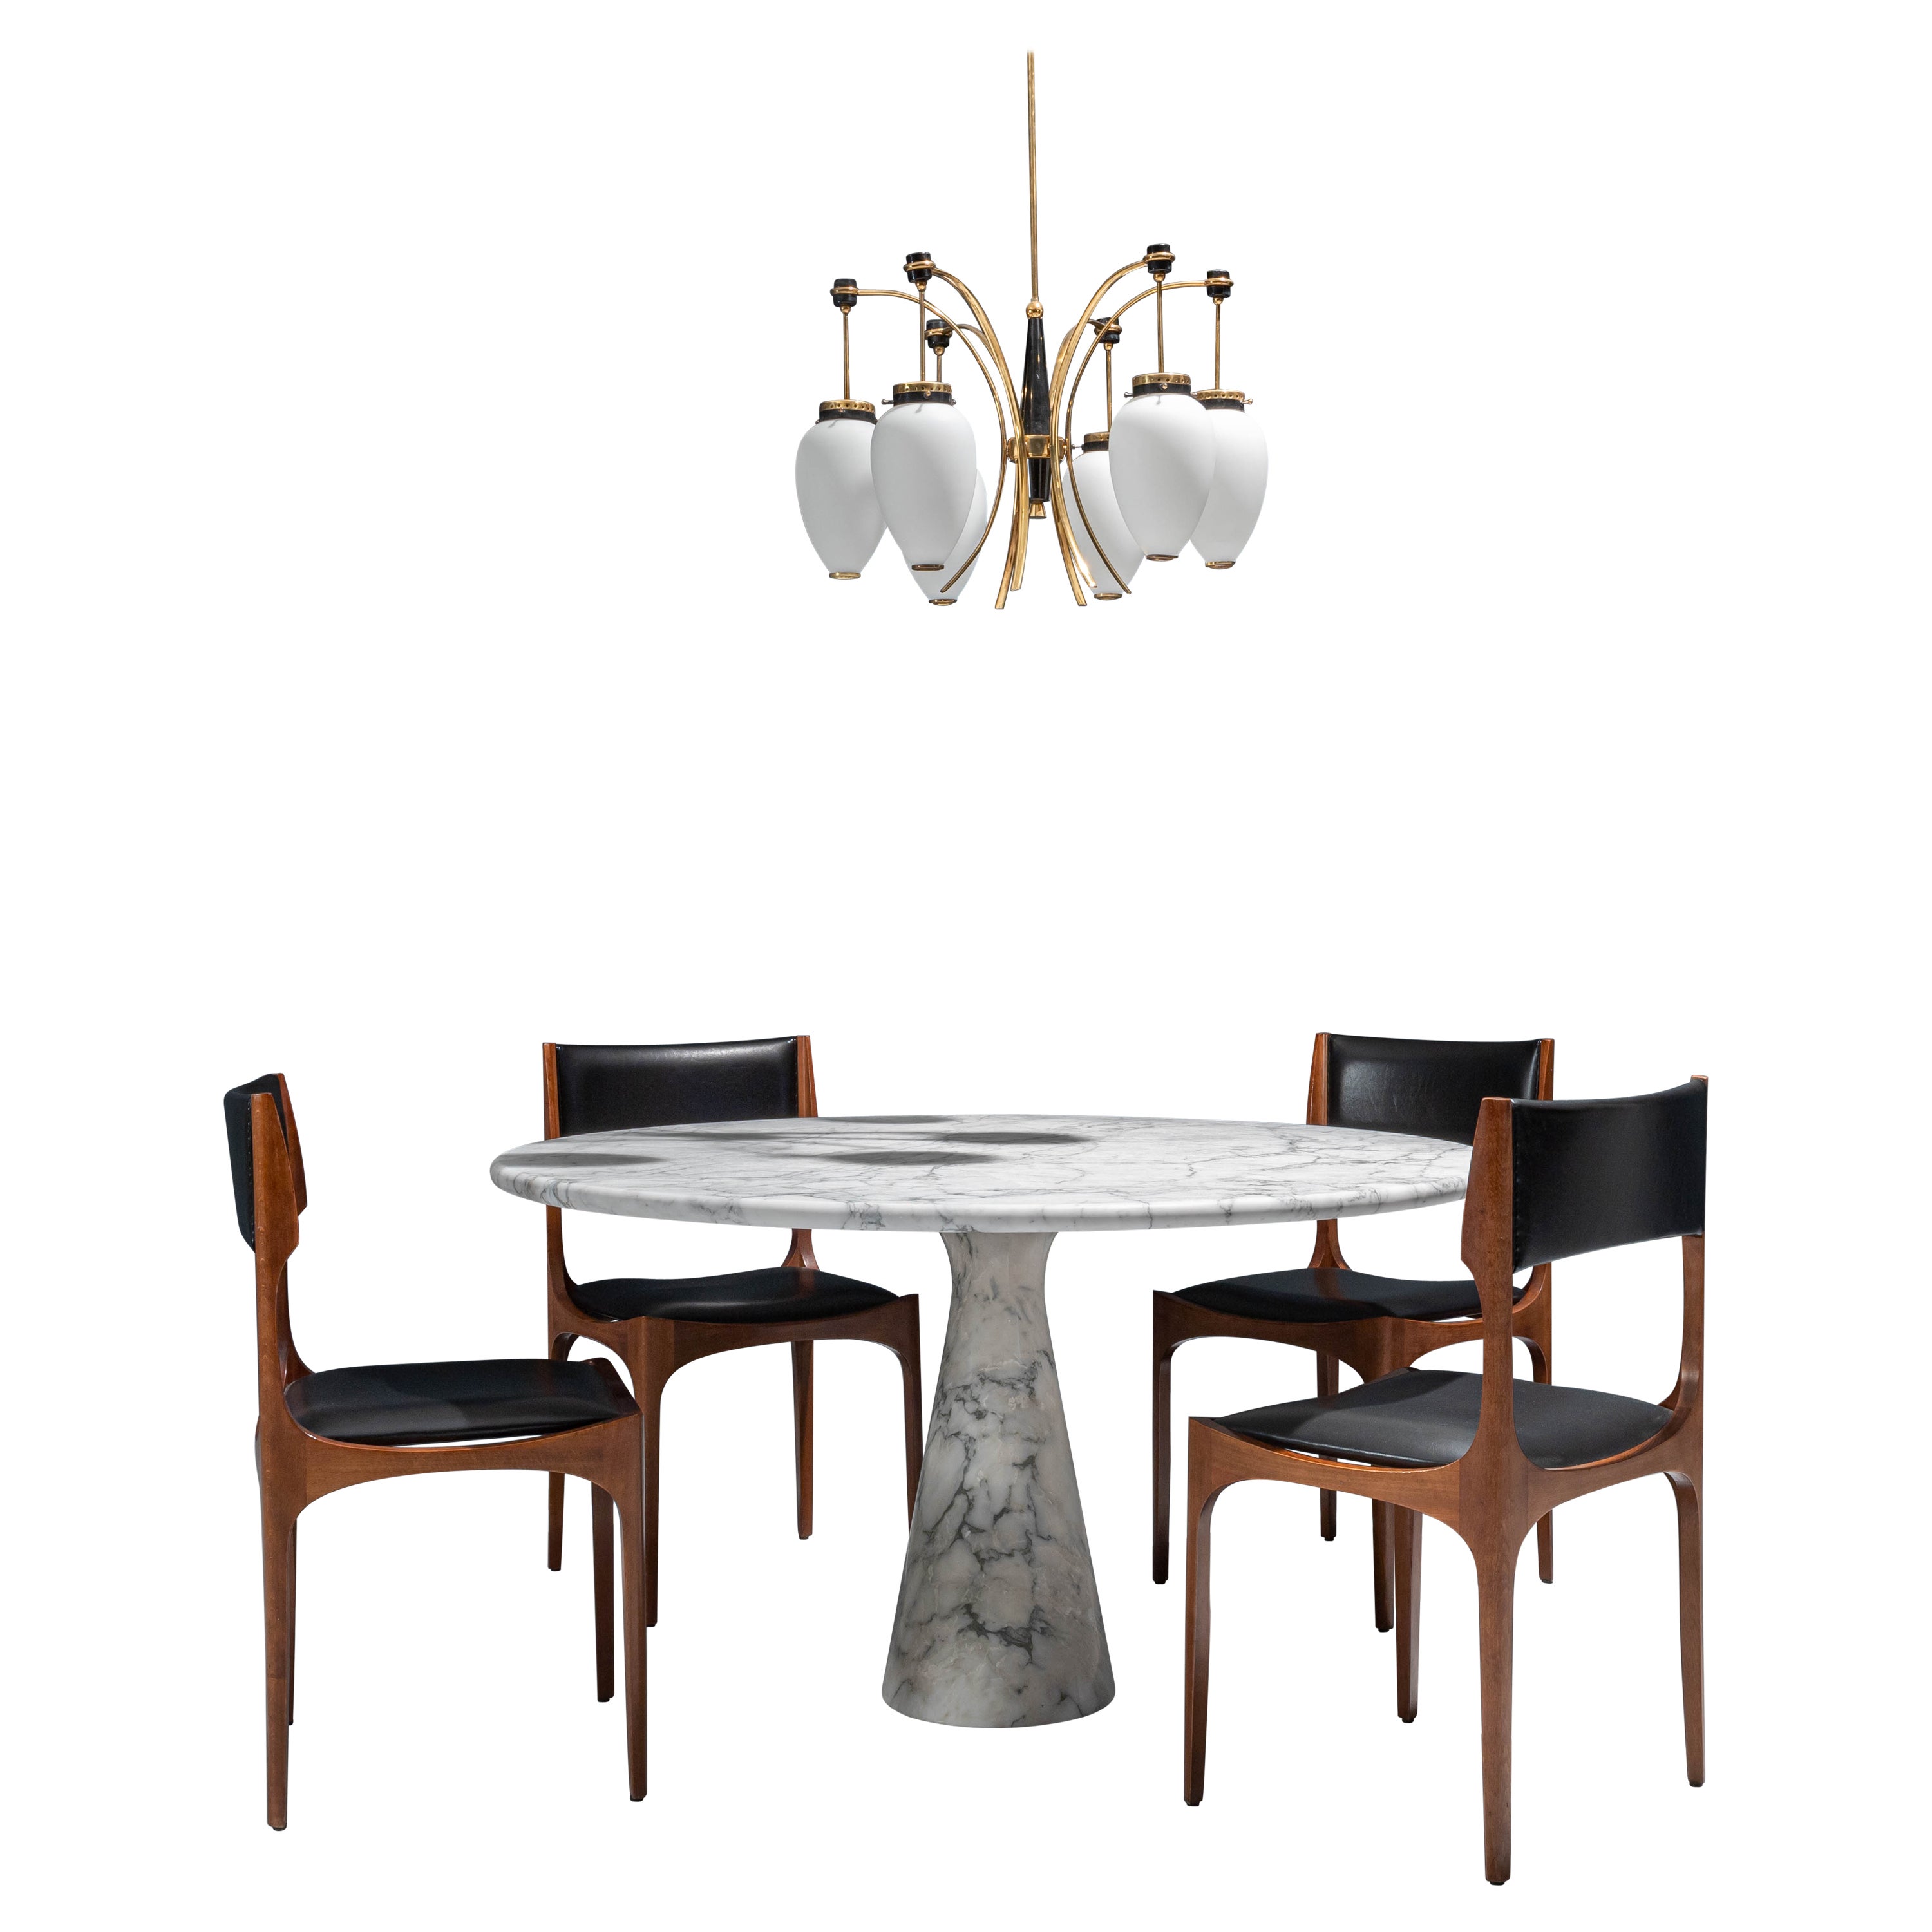 Mangiarotti Dining Room Set with Gibelli Chairs and Stilnovo Lamp, Italy